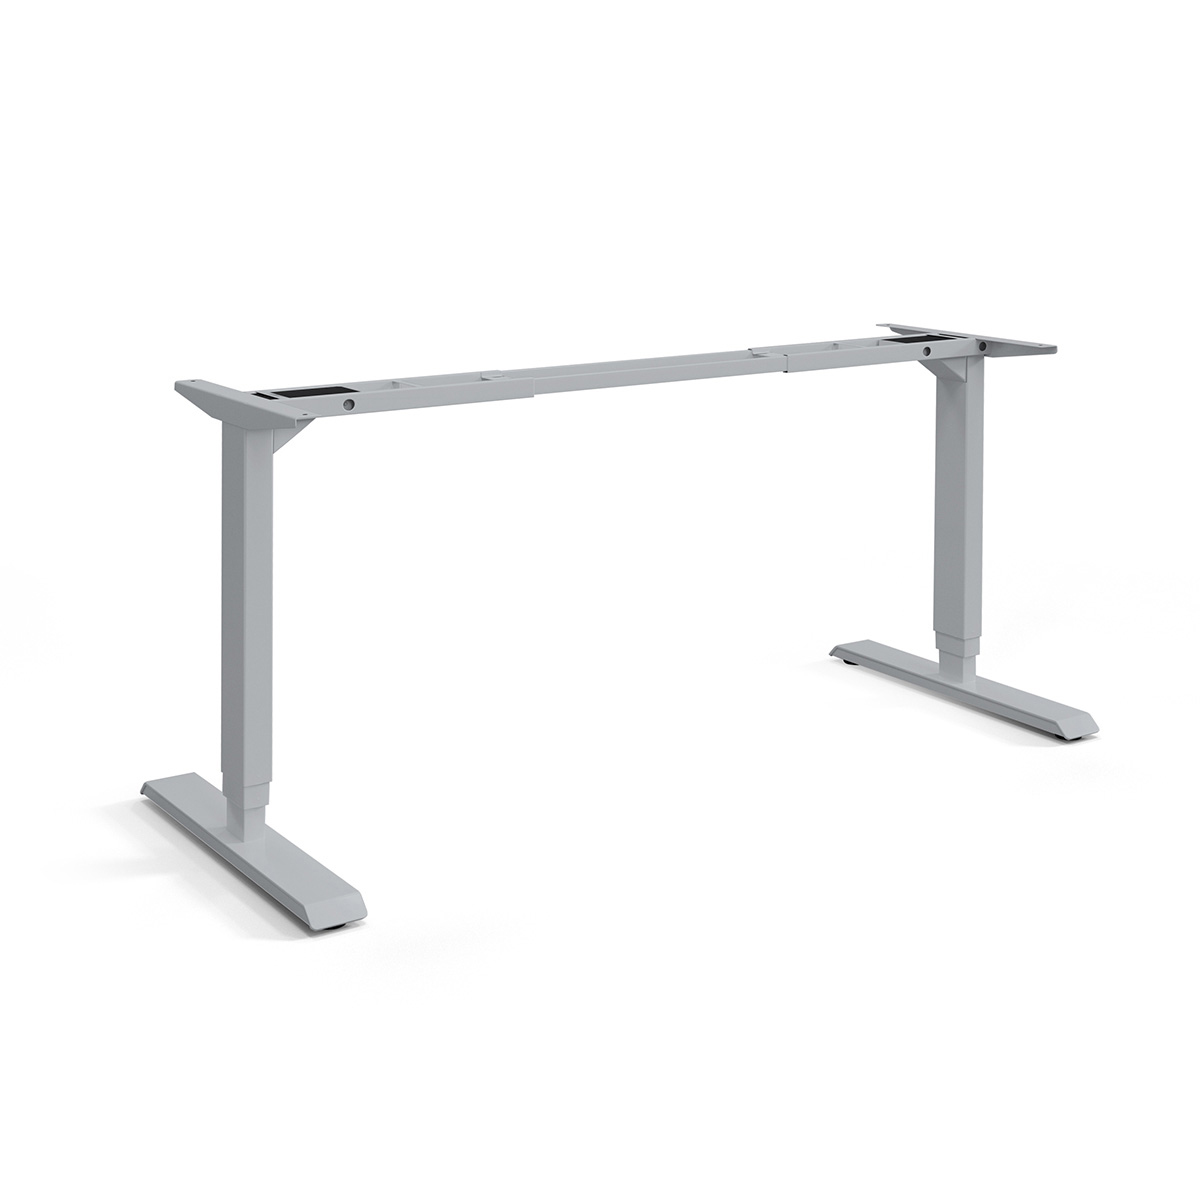 HAT Collective - Hi-HAT 3-Stage Height-Adjustable Table Base